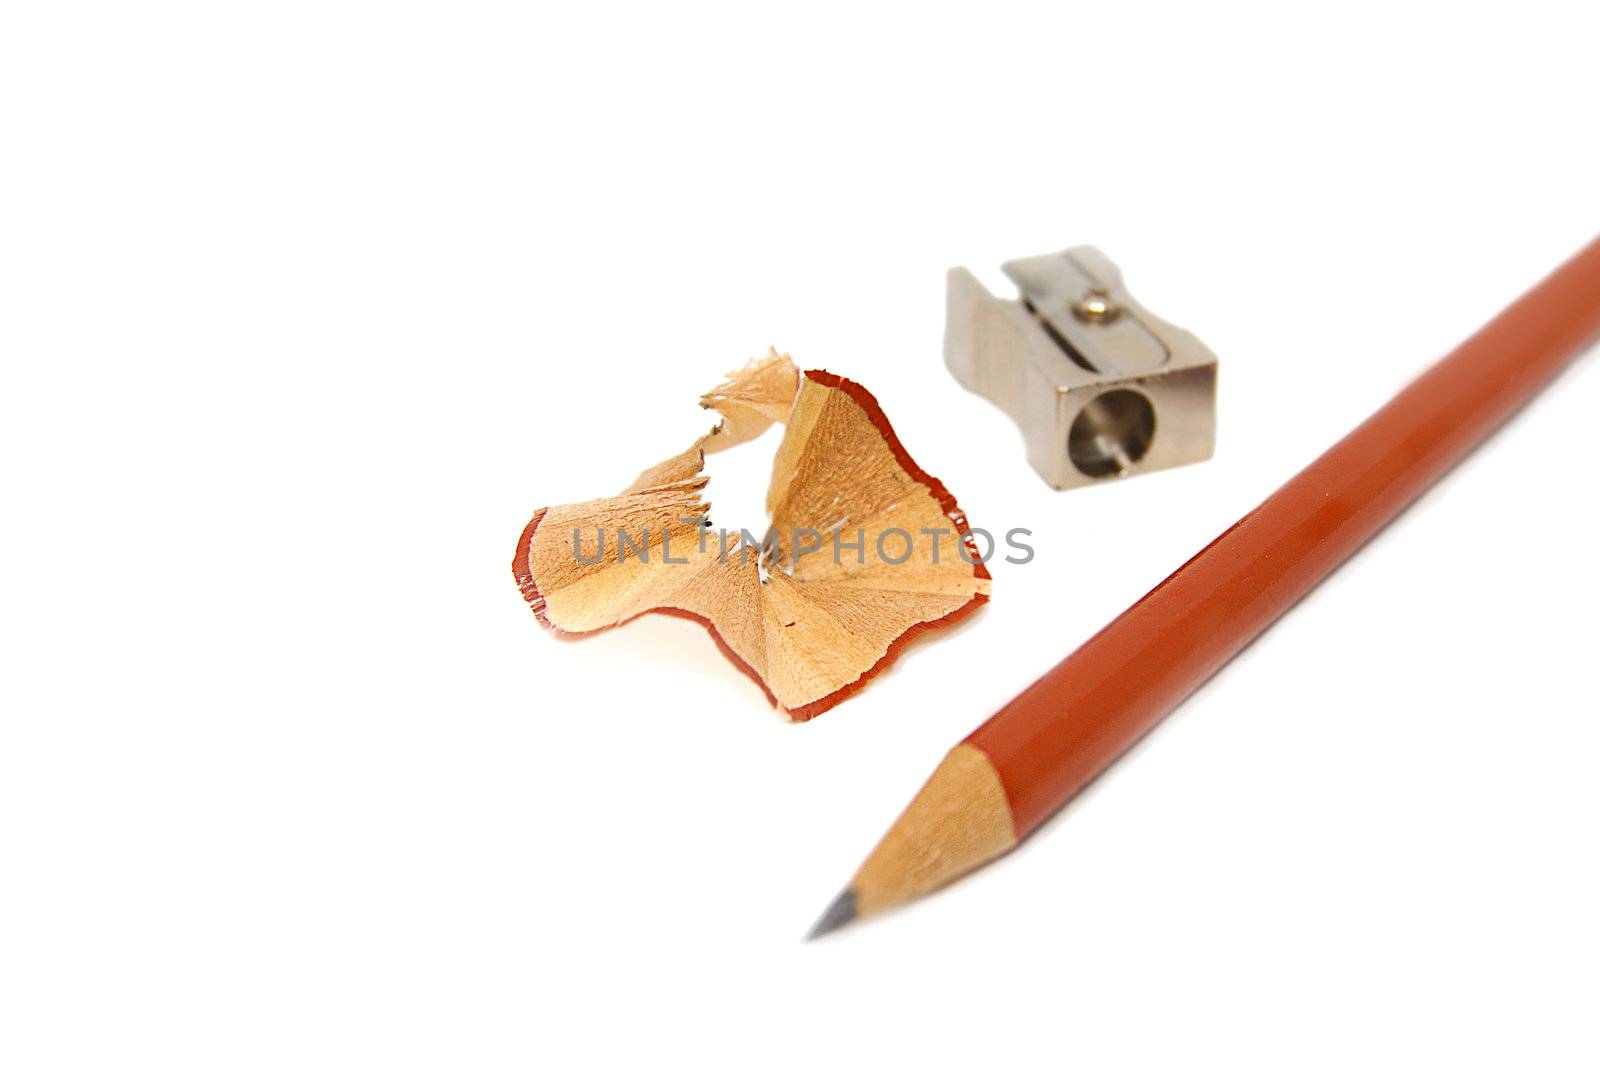 Sharpener, cuttings and pen isolated on white